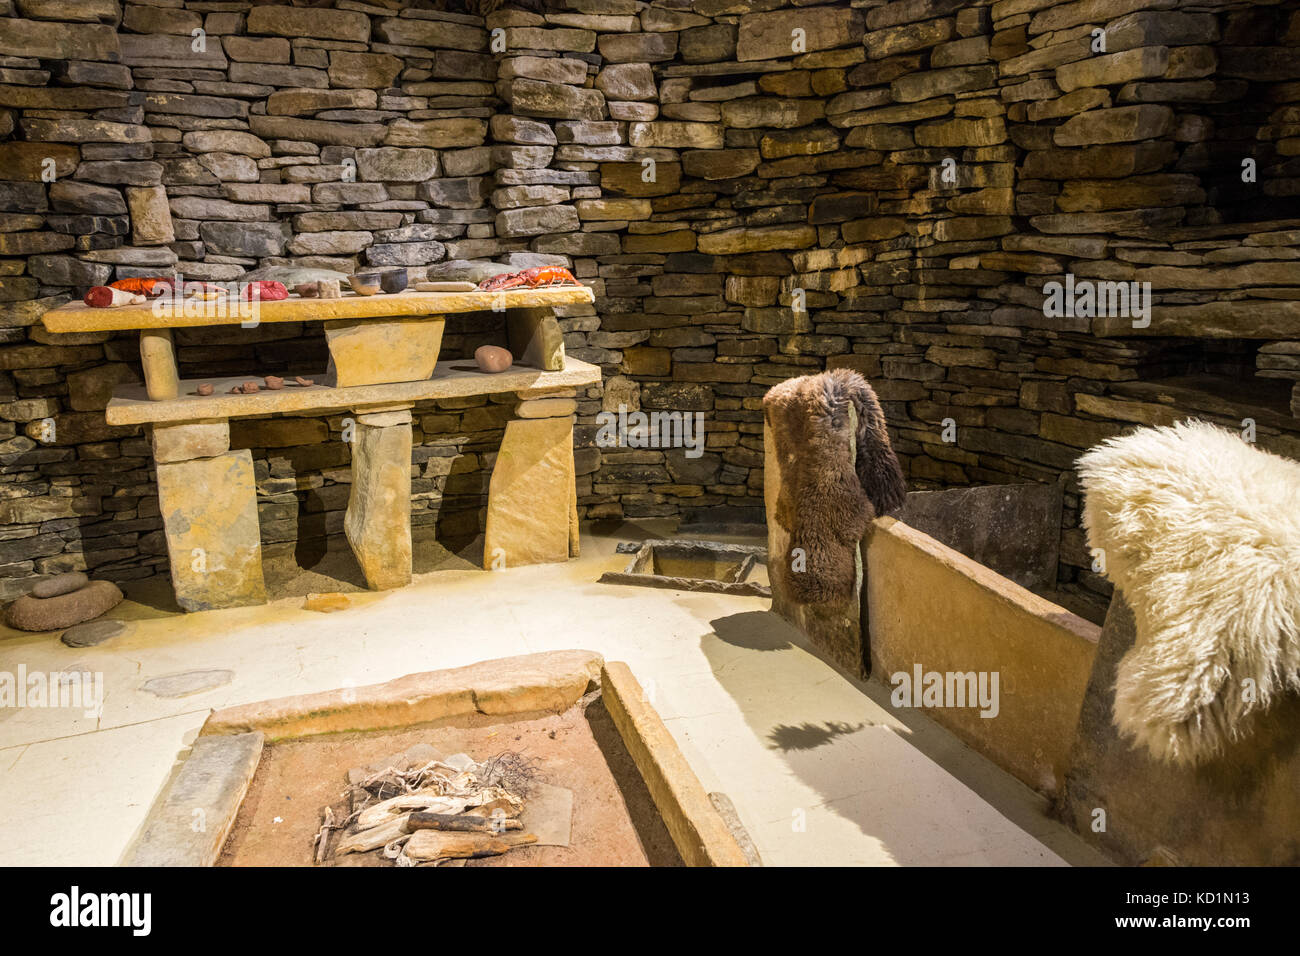 A modern reproduction of the interior of a dwelling at Skara Brae Neolithic Village.,Orkney Mainland, Scotland, UK. Stock Photo